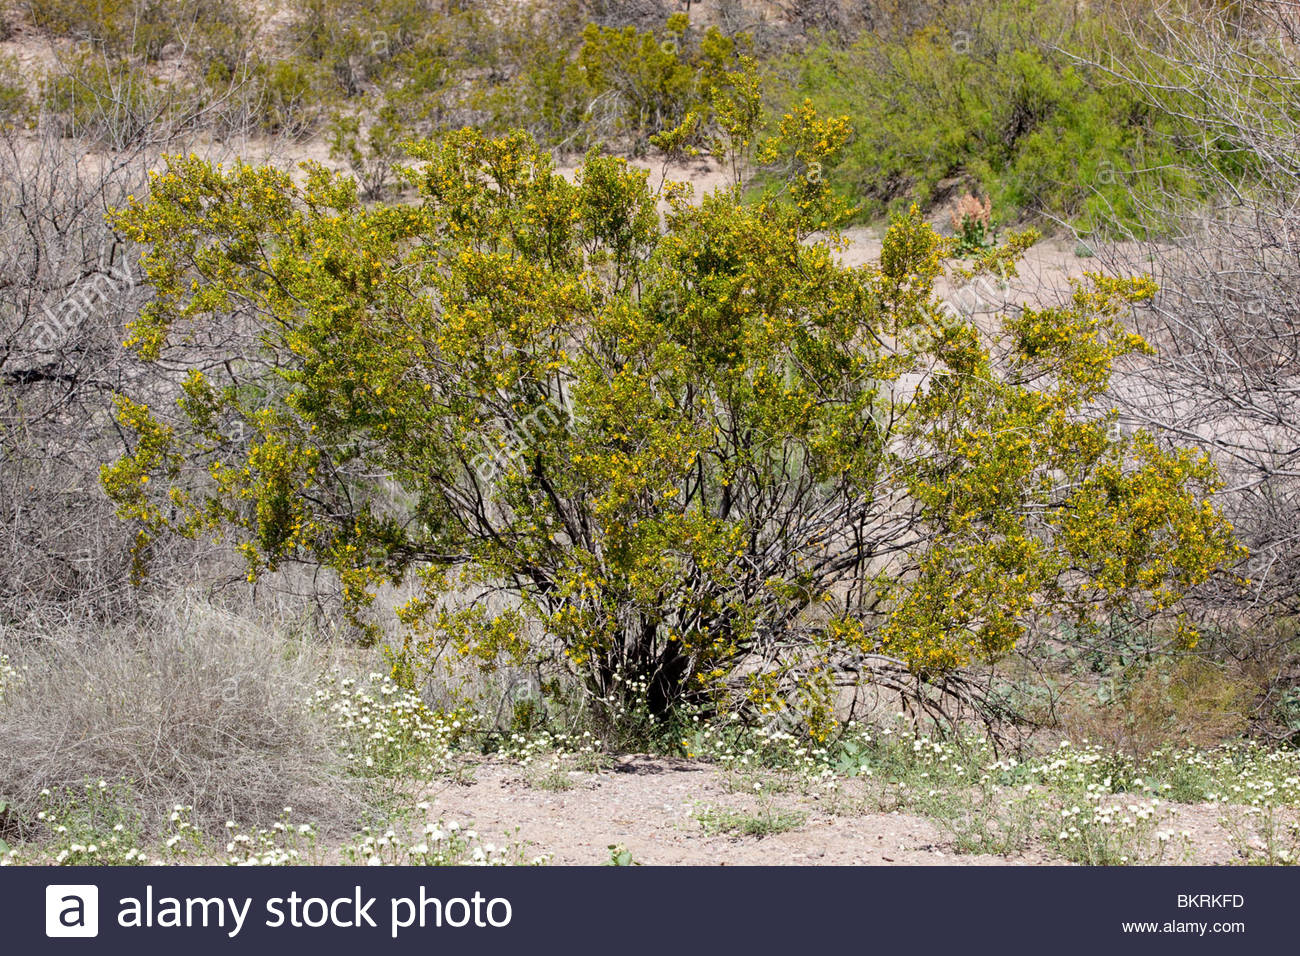 Cannundrums Creosote Bush